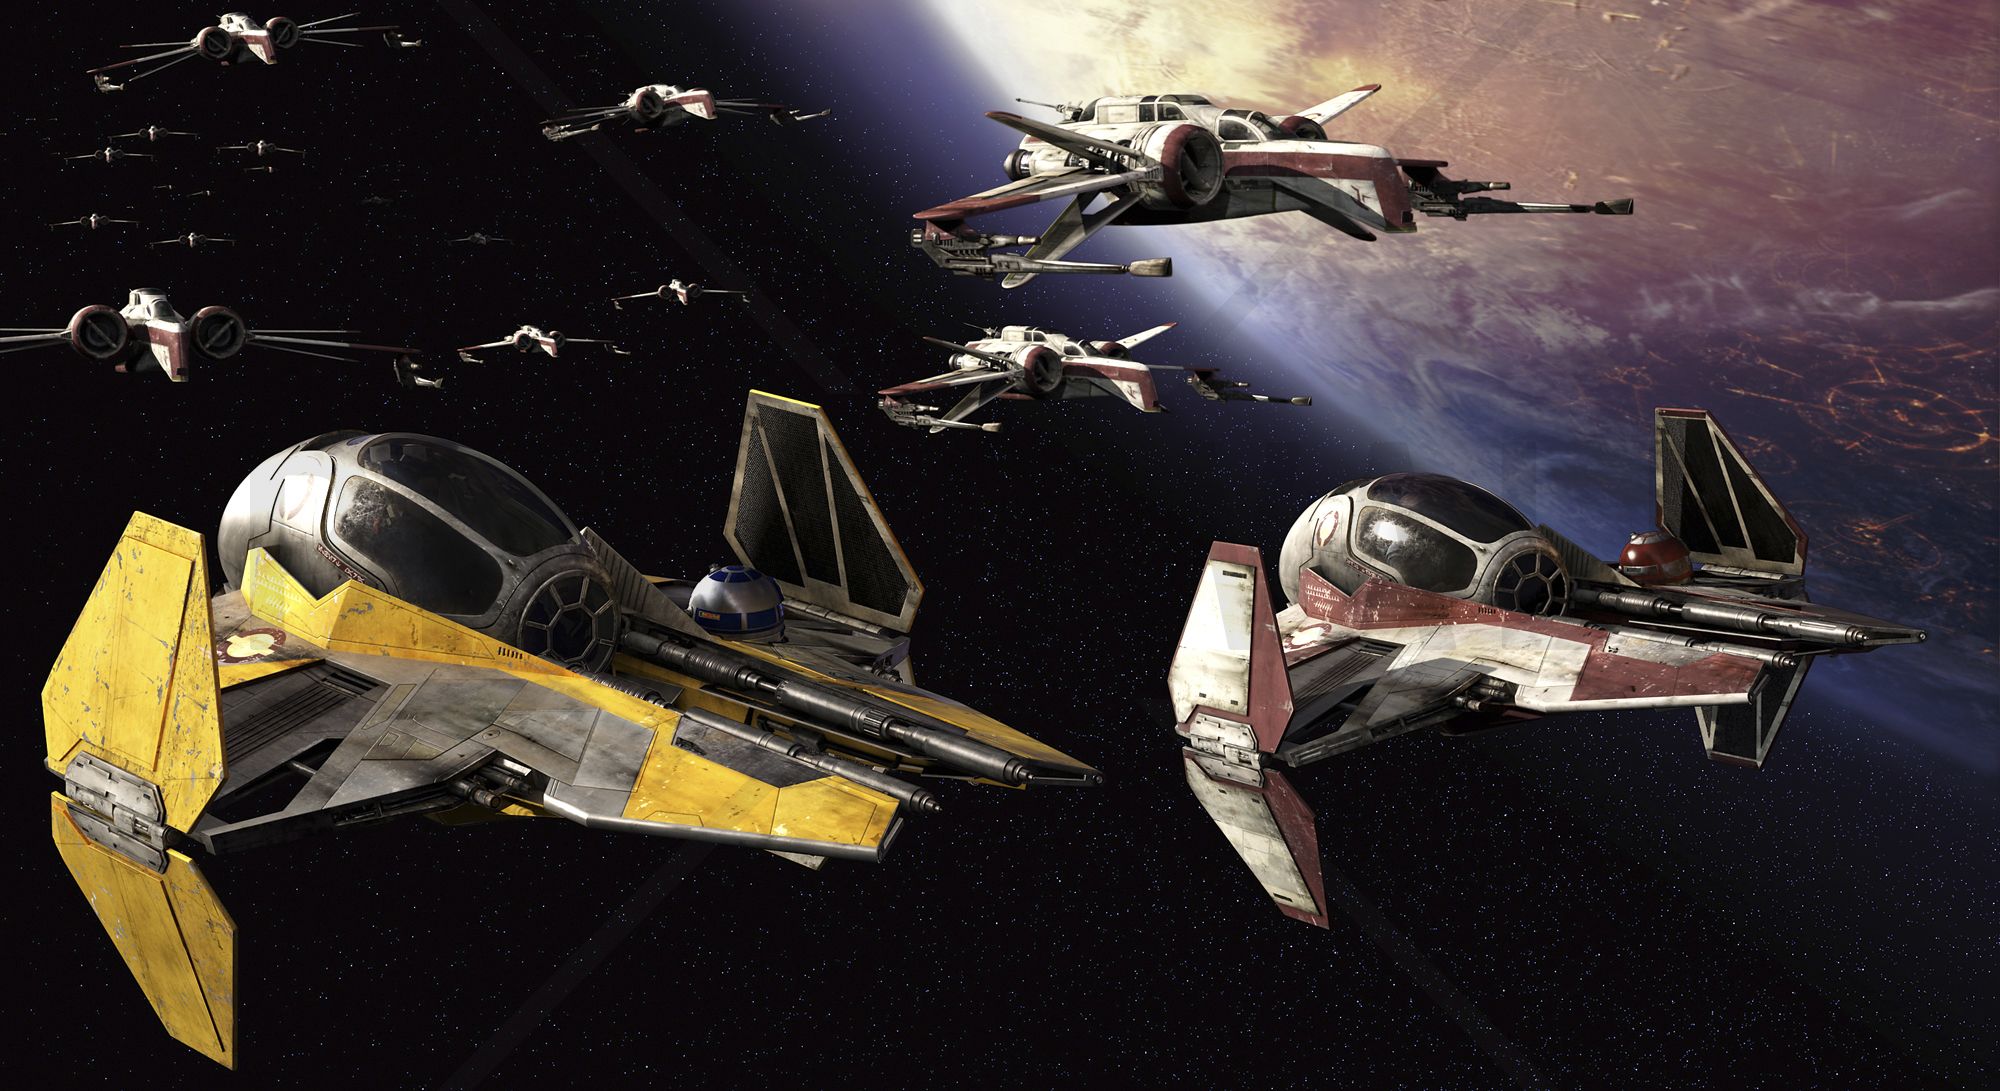 Star Wars over Planets 3 Mural & Photo Wallpaper. Star wars spaceships, Star wars wallpaper, Star wars ships